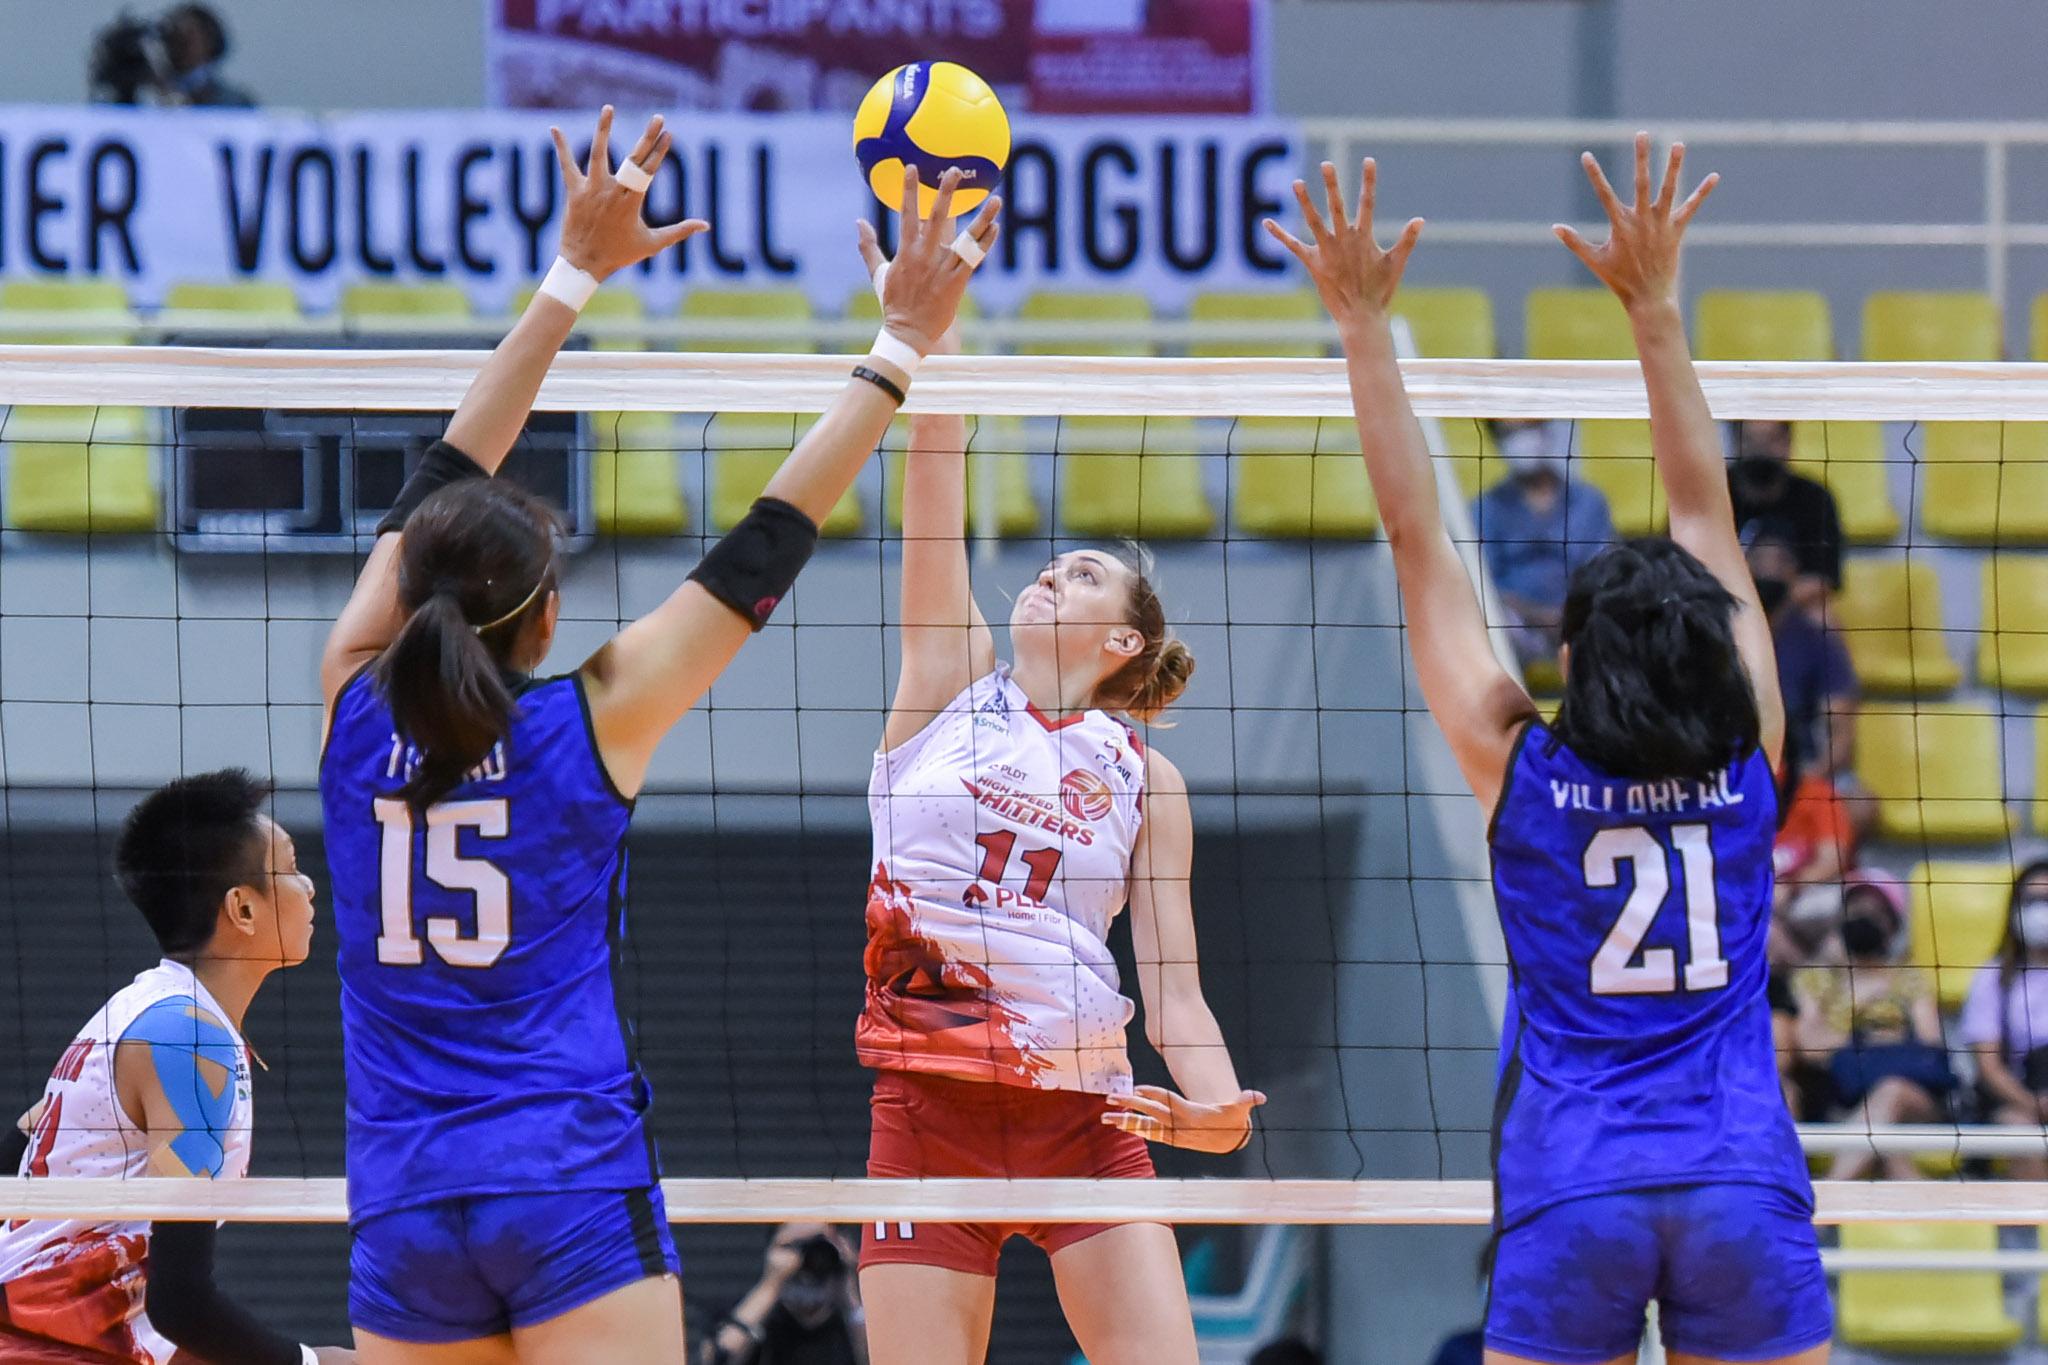 PLDT, Cignal triumphant in PVL Reinforced Conference opener GMA News Online